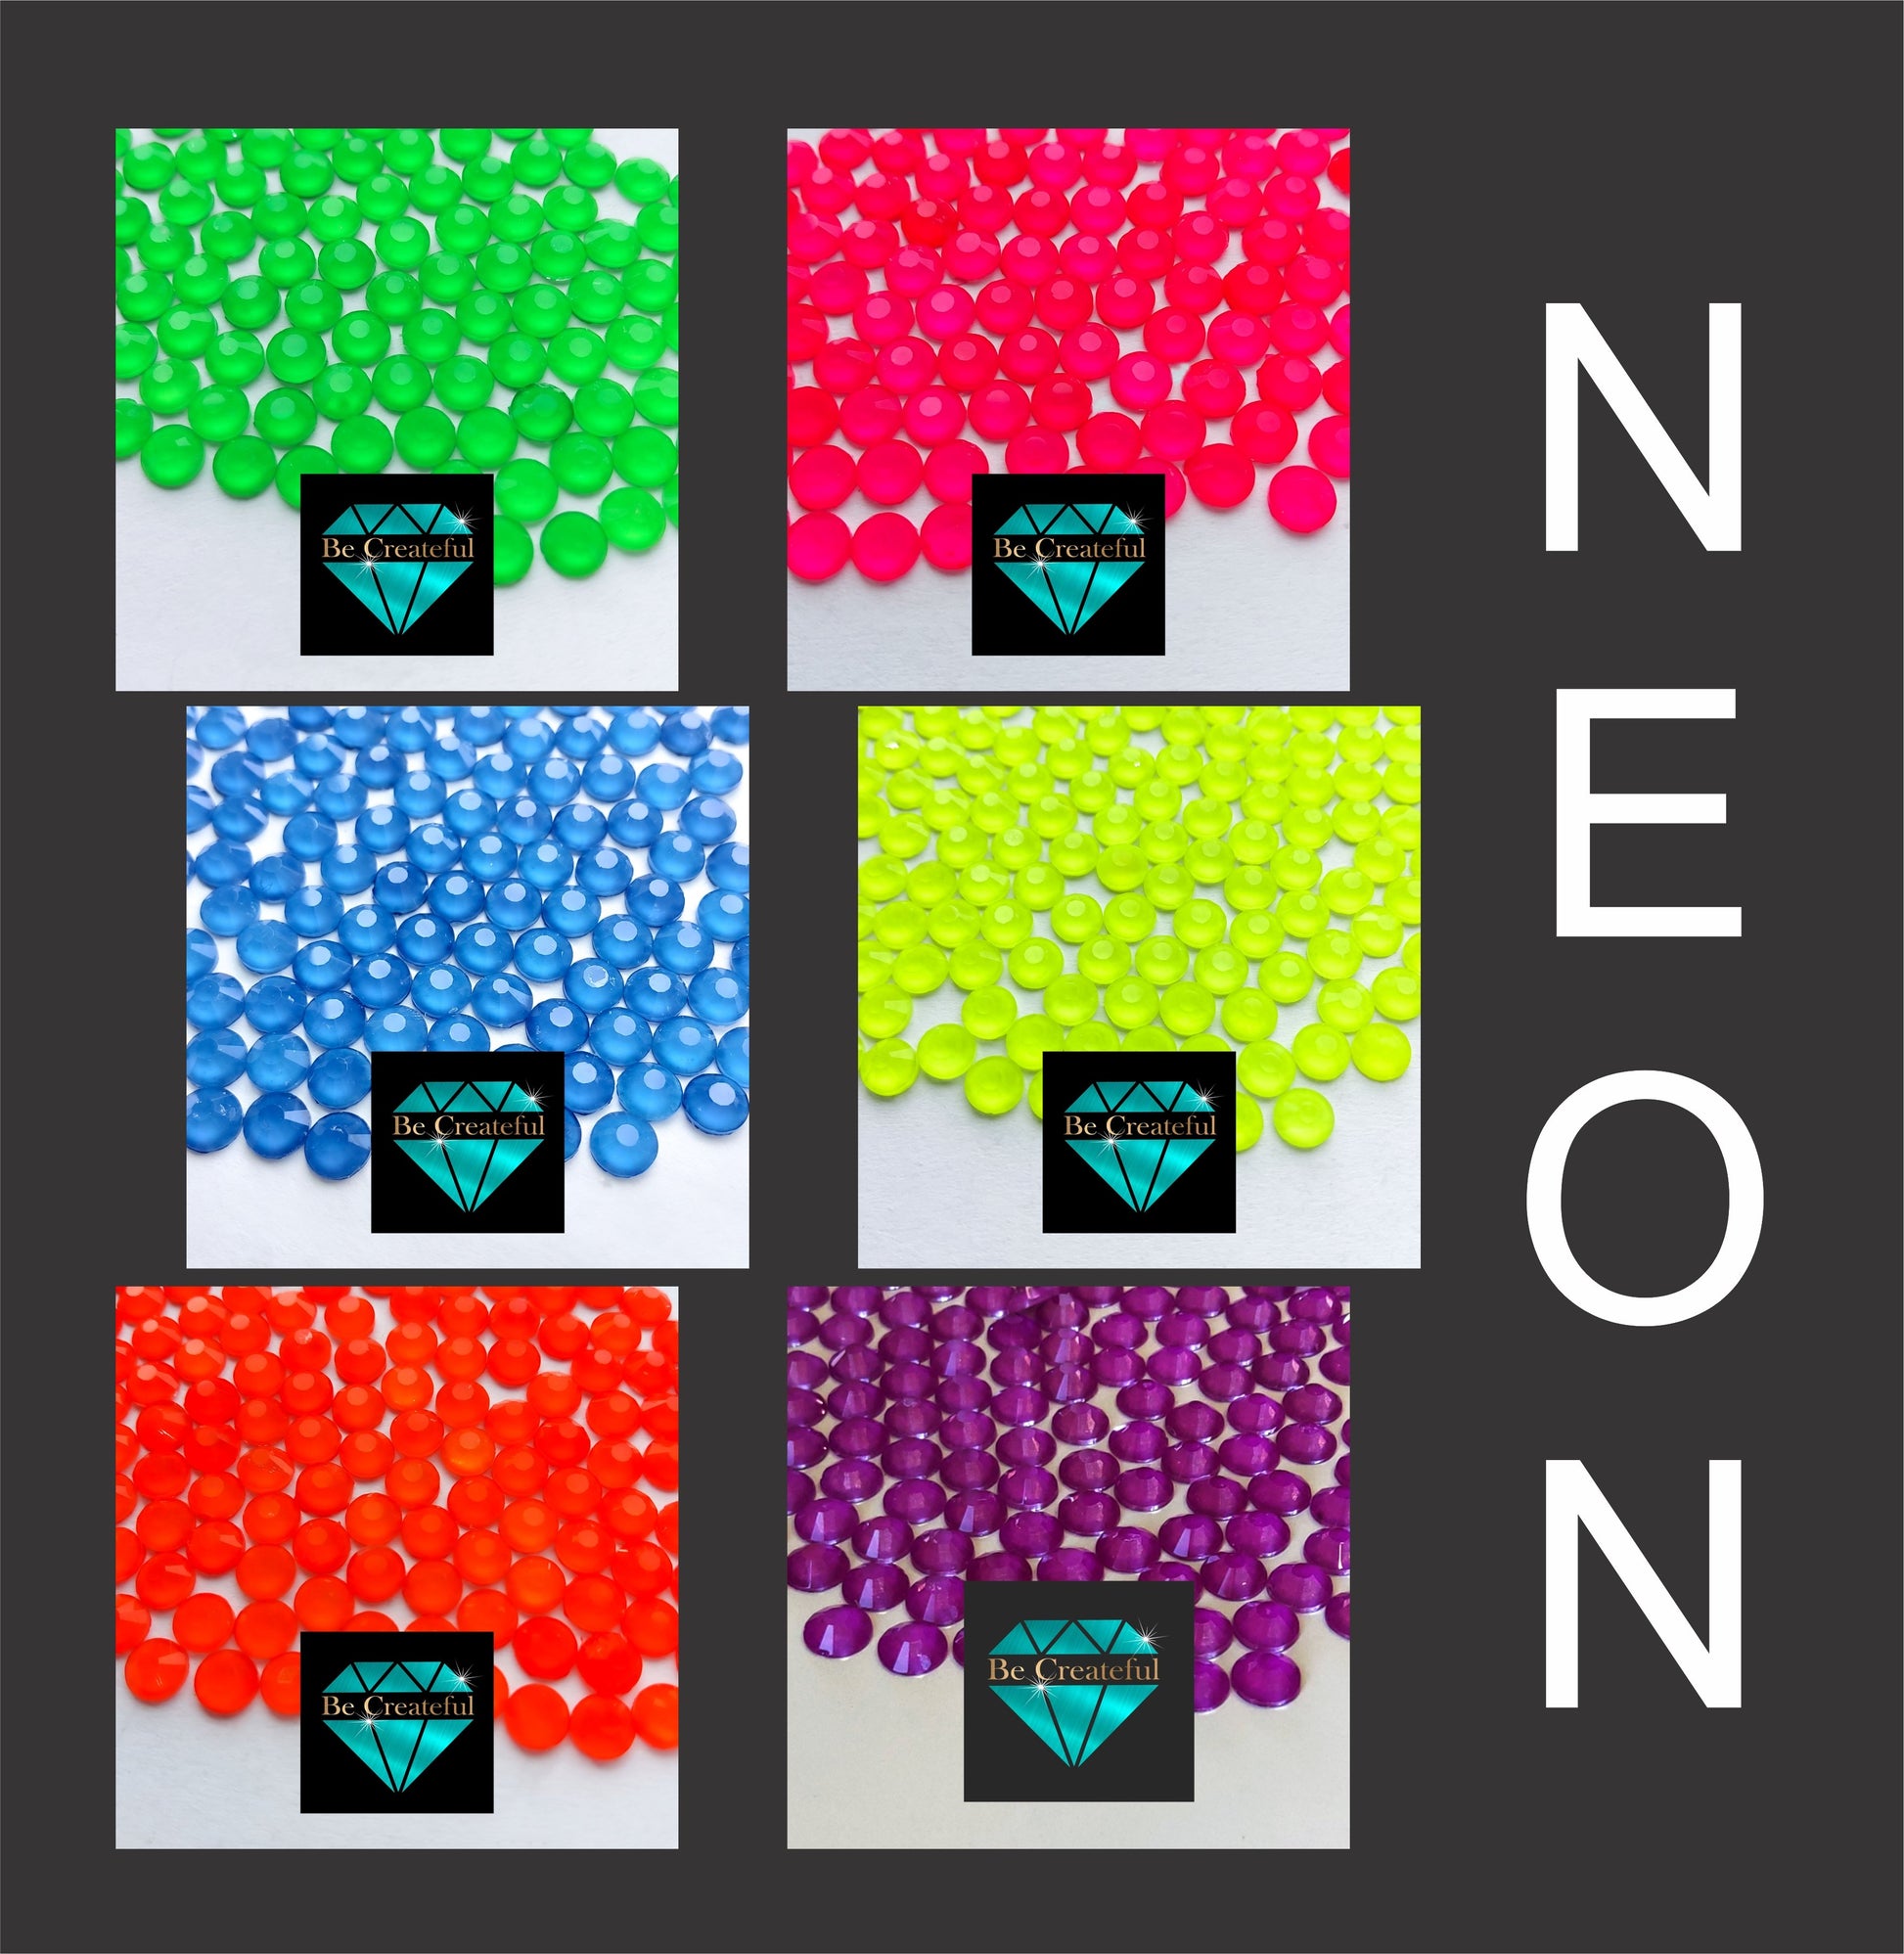 LUXE Neon hotfix color kit - 10 gross of SS10 glass hotfix rhinestones in 6 vibrant colors. - Neon hotfix rhinestone kit